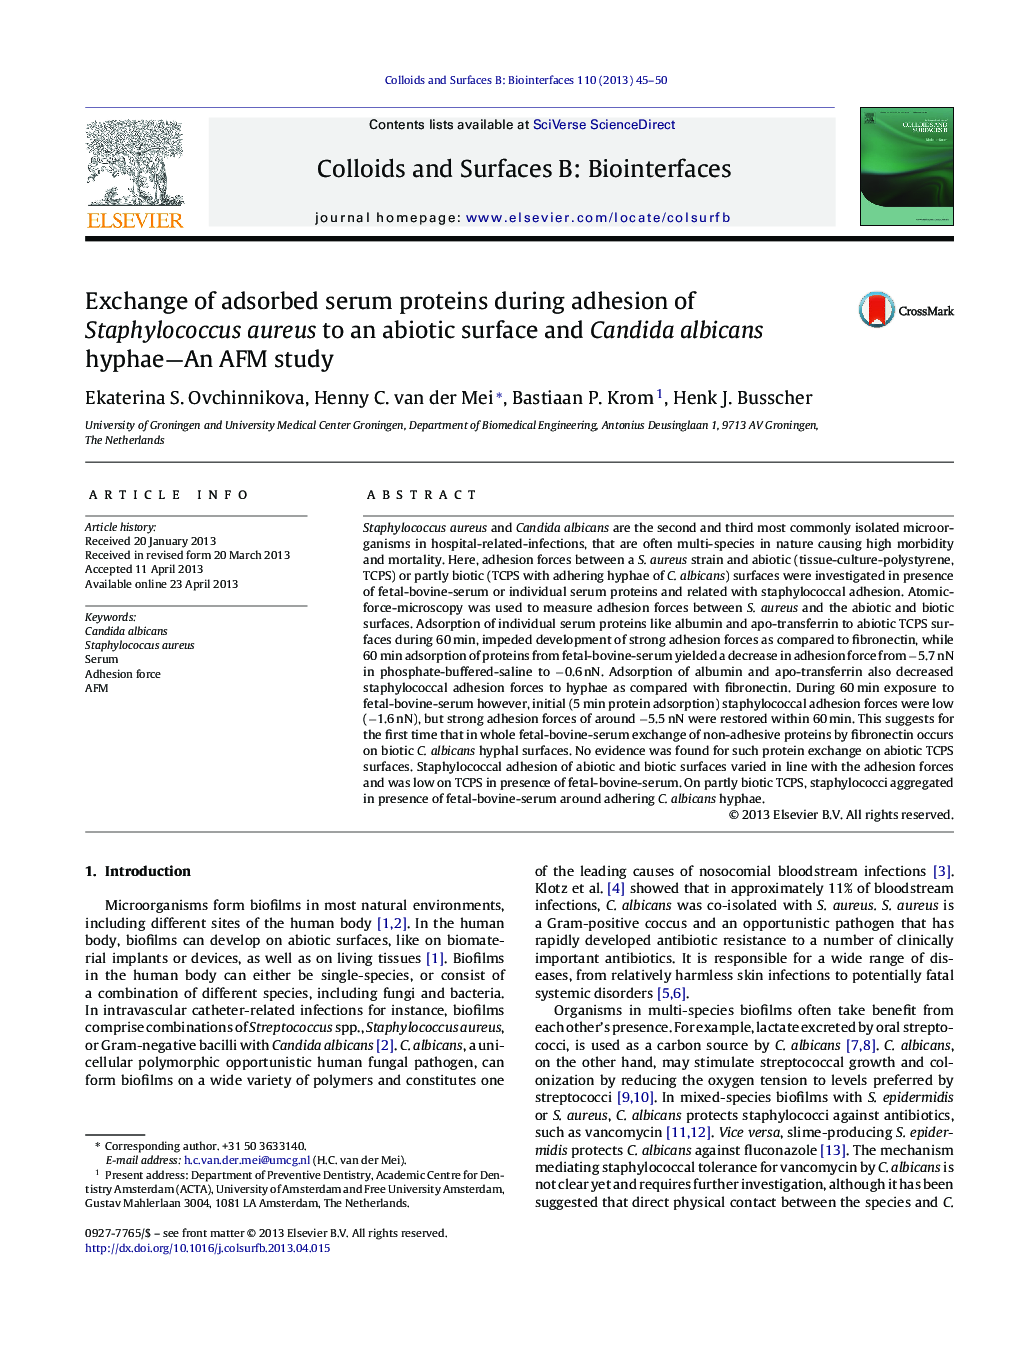 Exchange of adsorbed serum proteins during adhesion of Staphylococcus aureus to an abiotic surface and Candida albicans hyphae-An AFM study